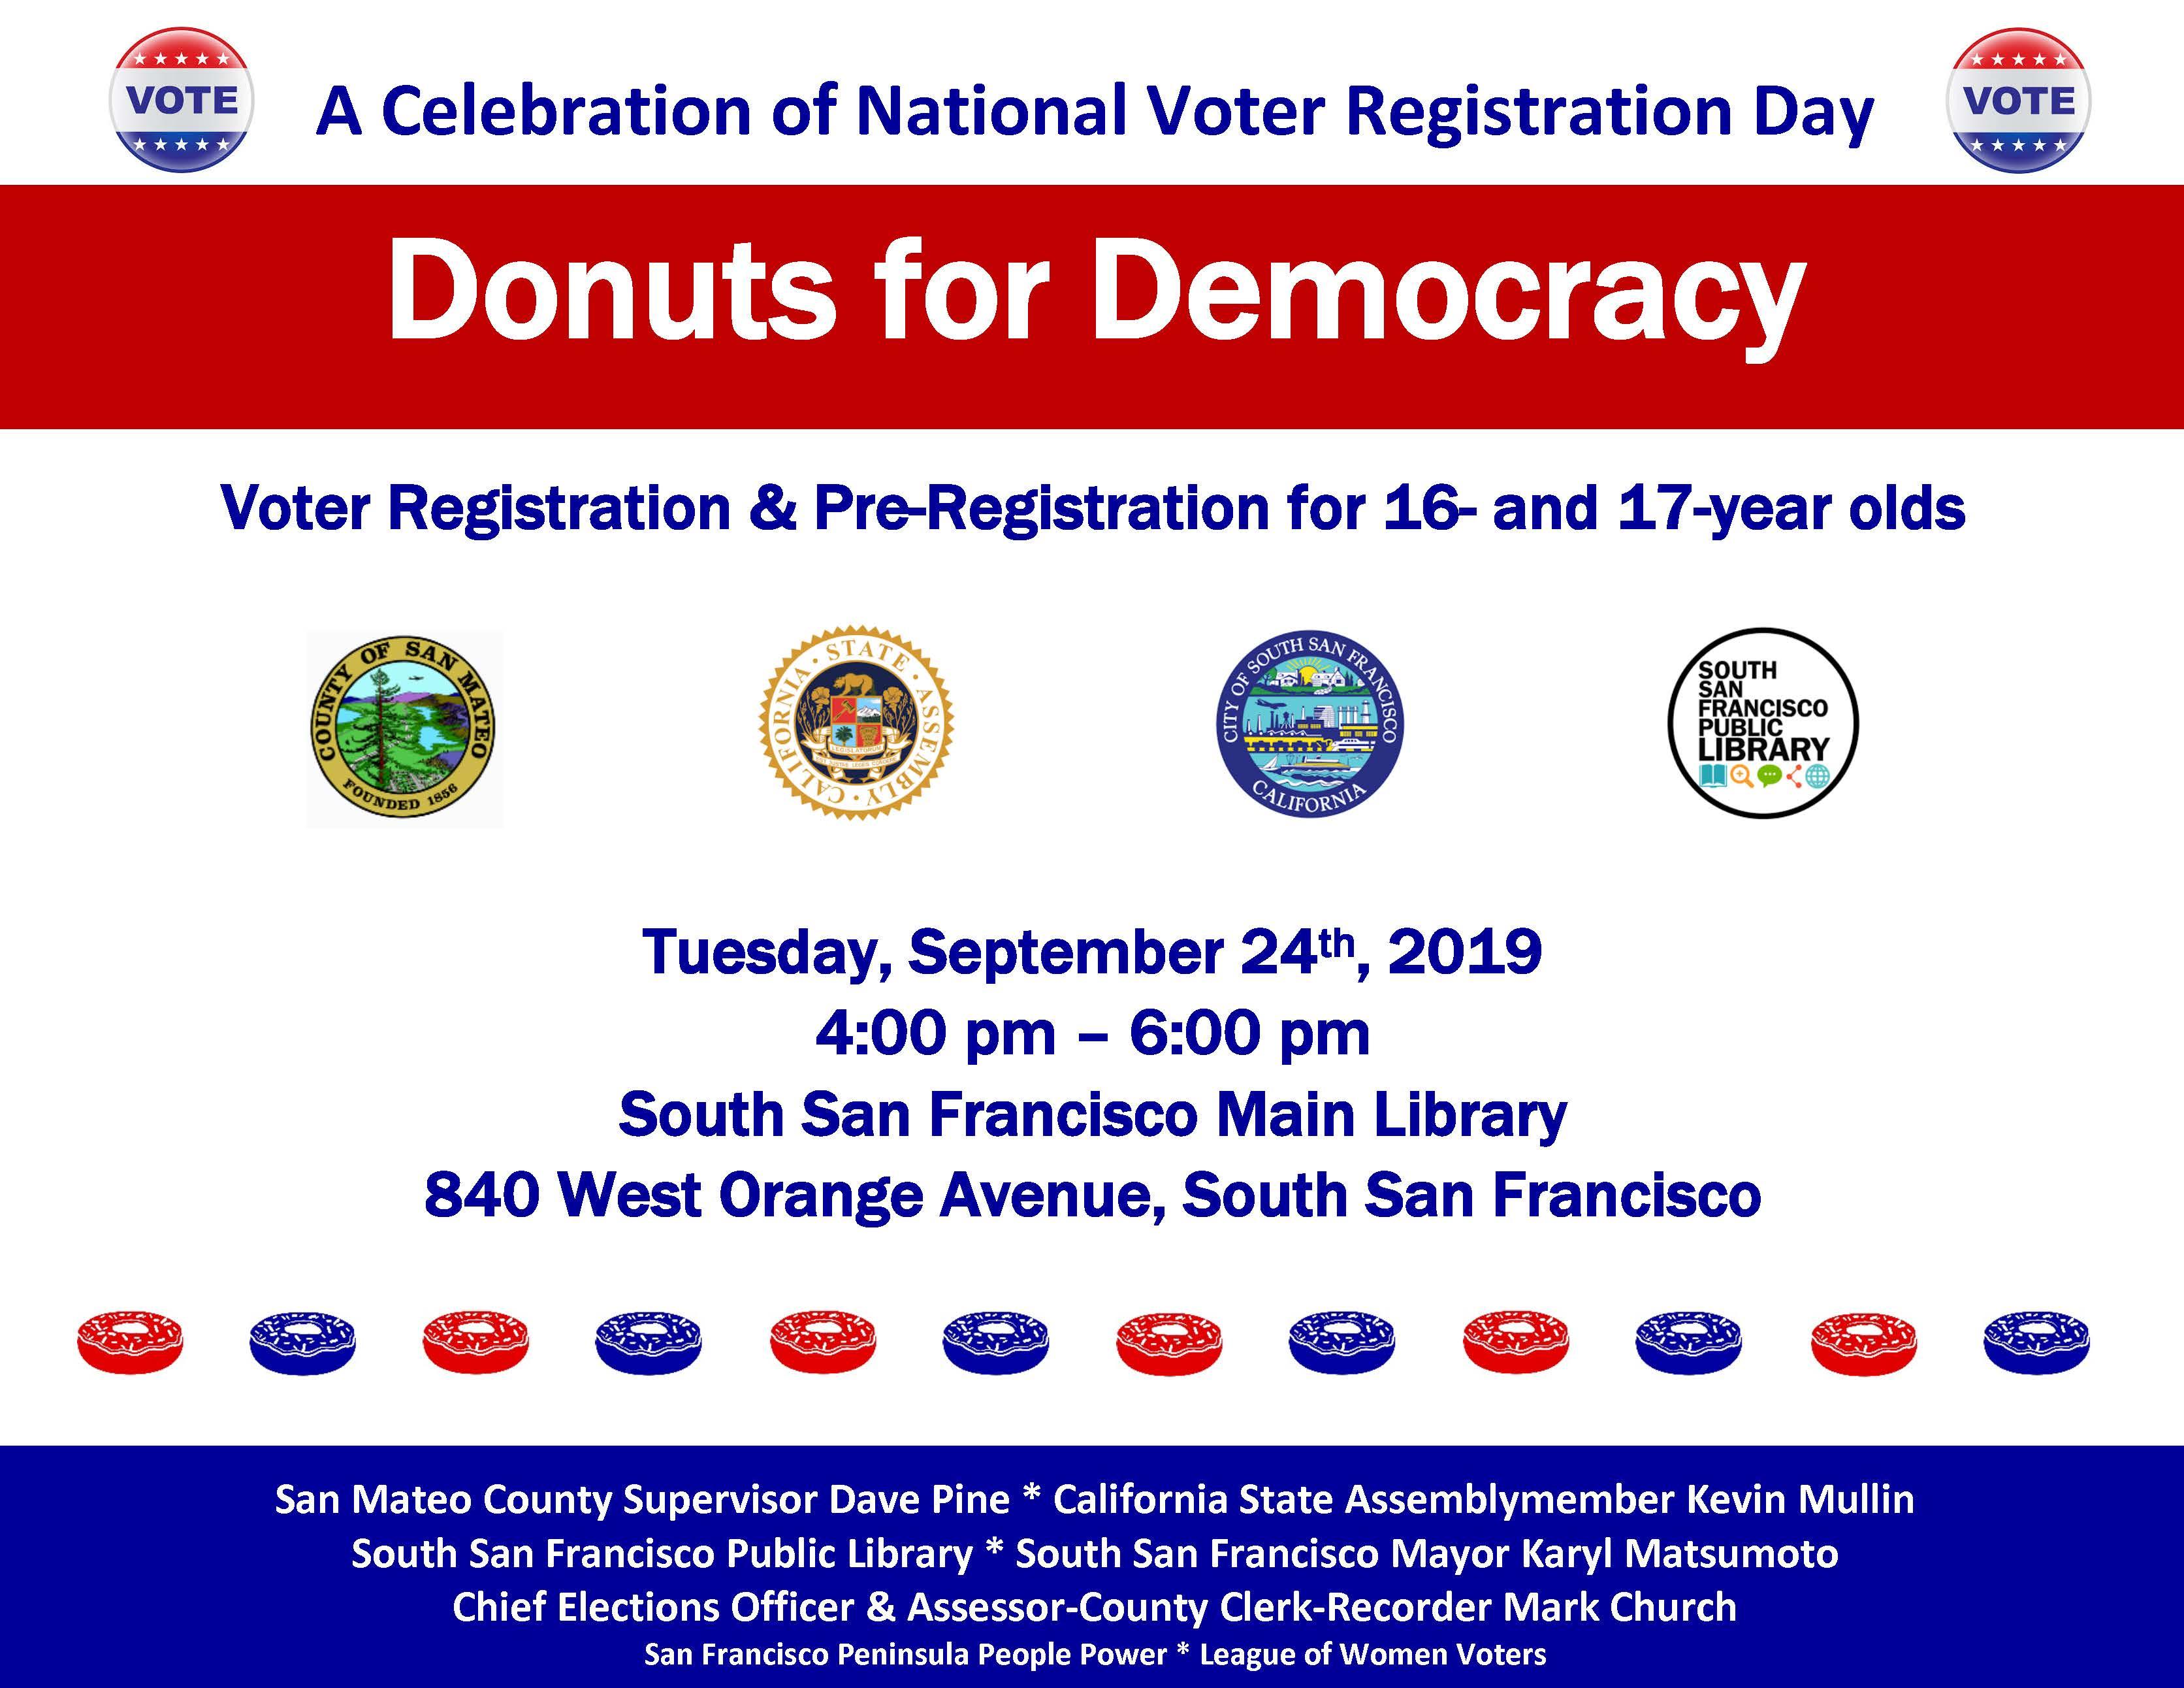 Donuts for Democracy - Voter Registration & Pre-Registration for 16- and 17-year olds